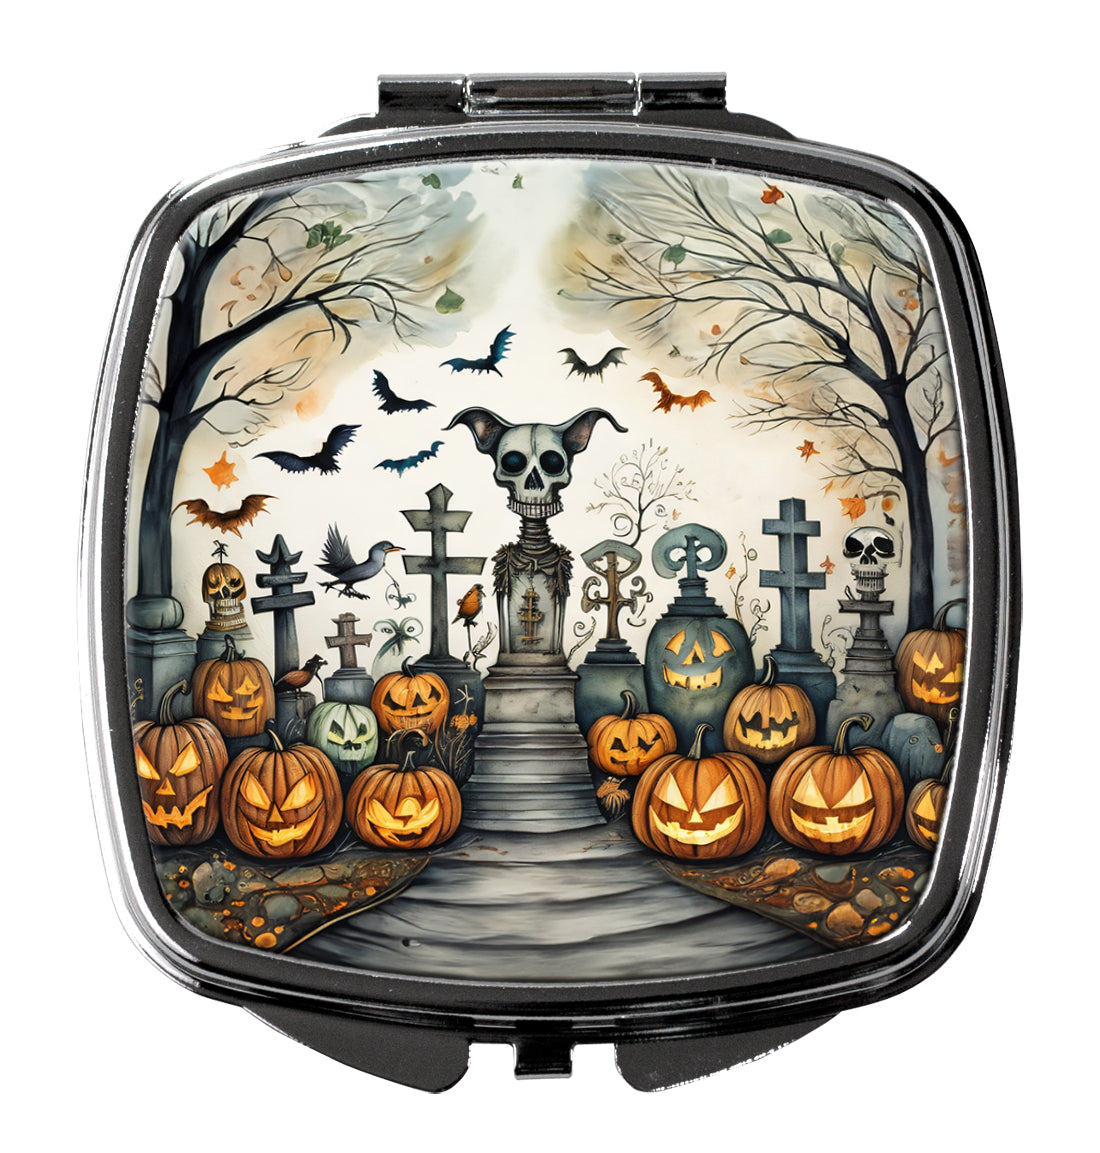 Buy this Pet Cemetery Spooky Halloween Compact Mirror